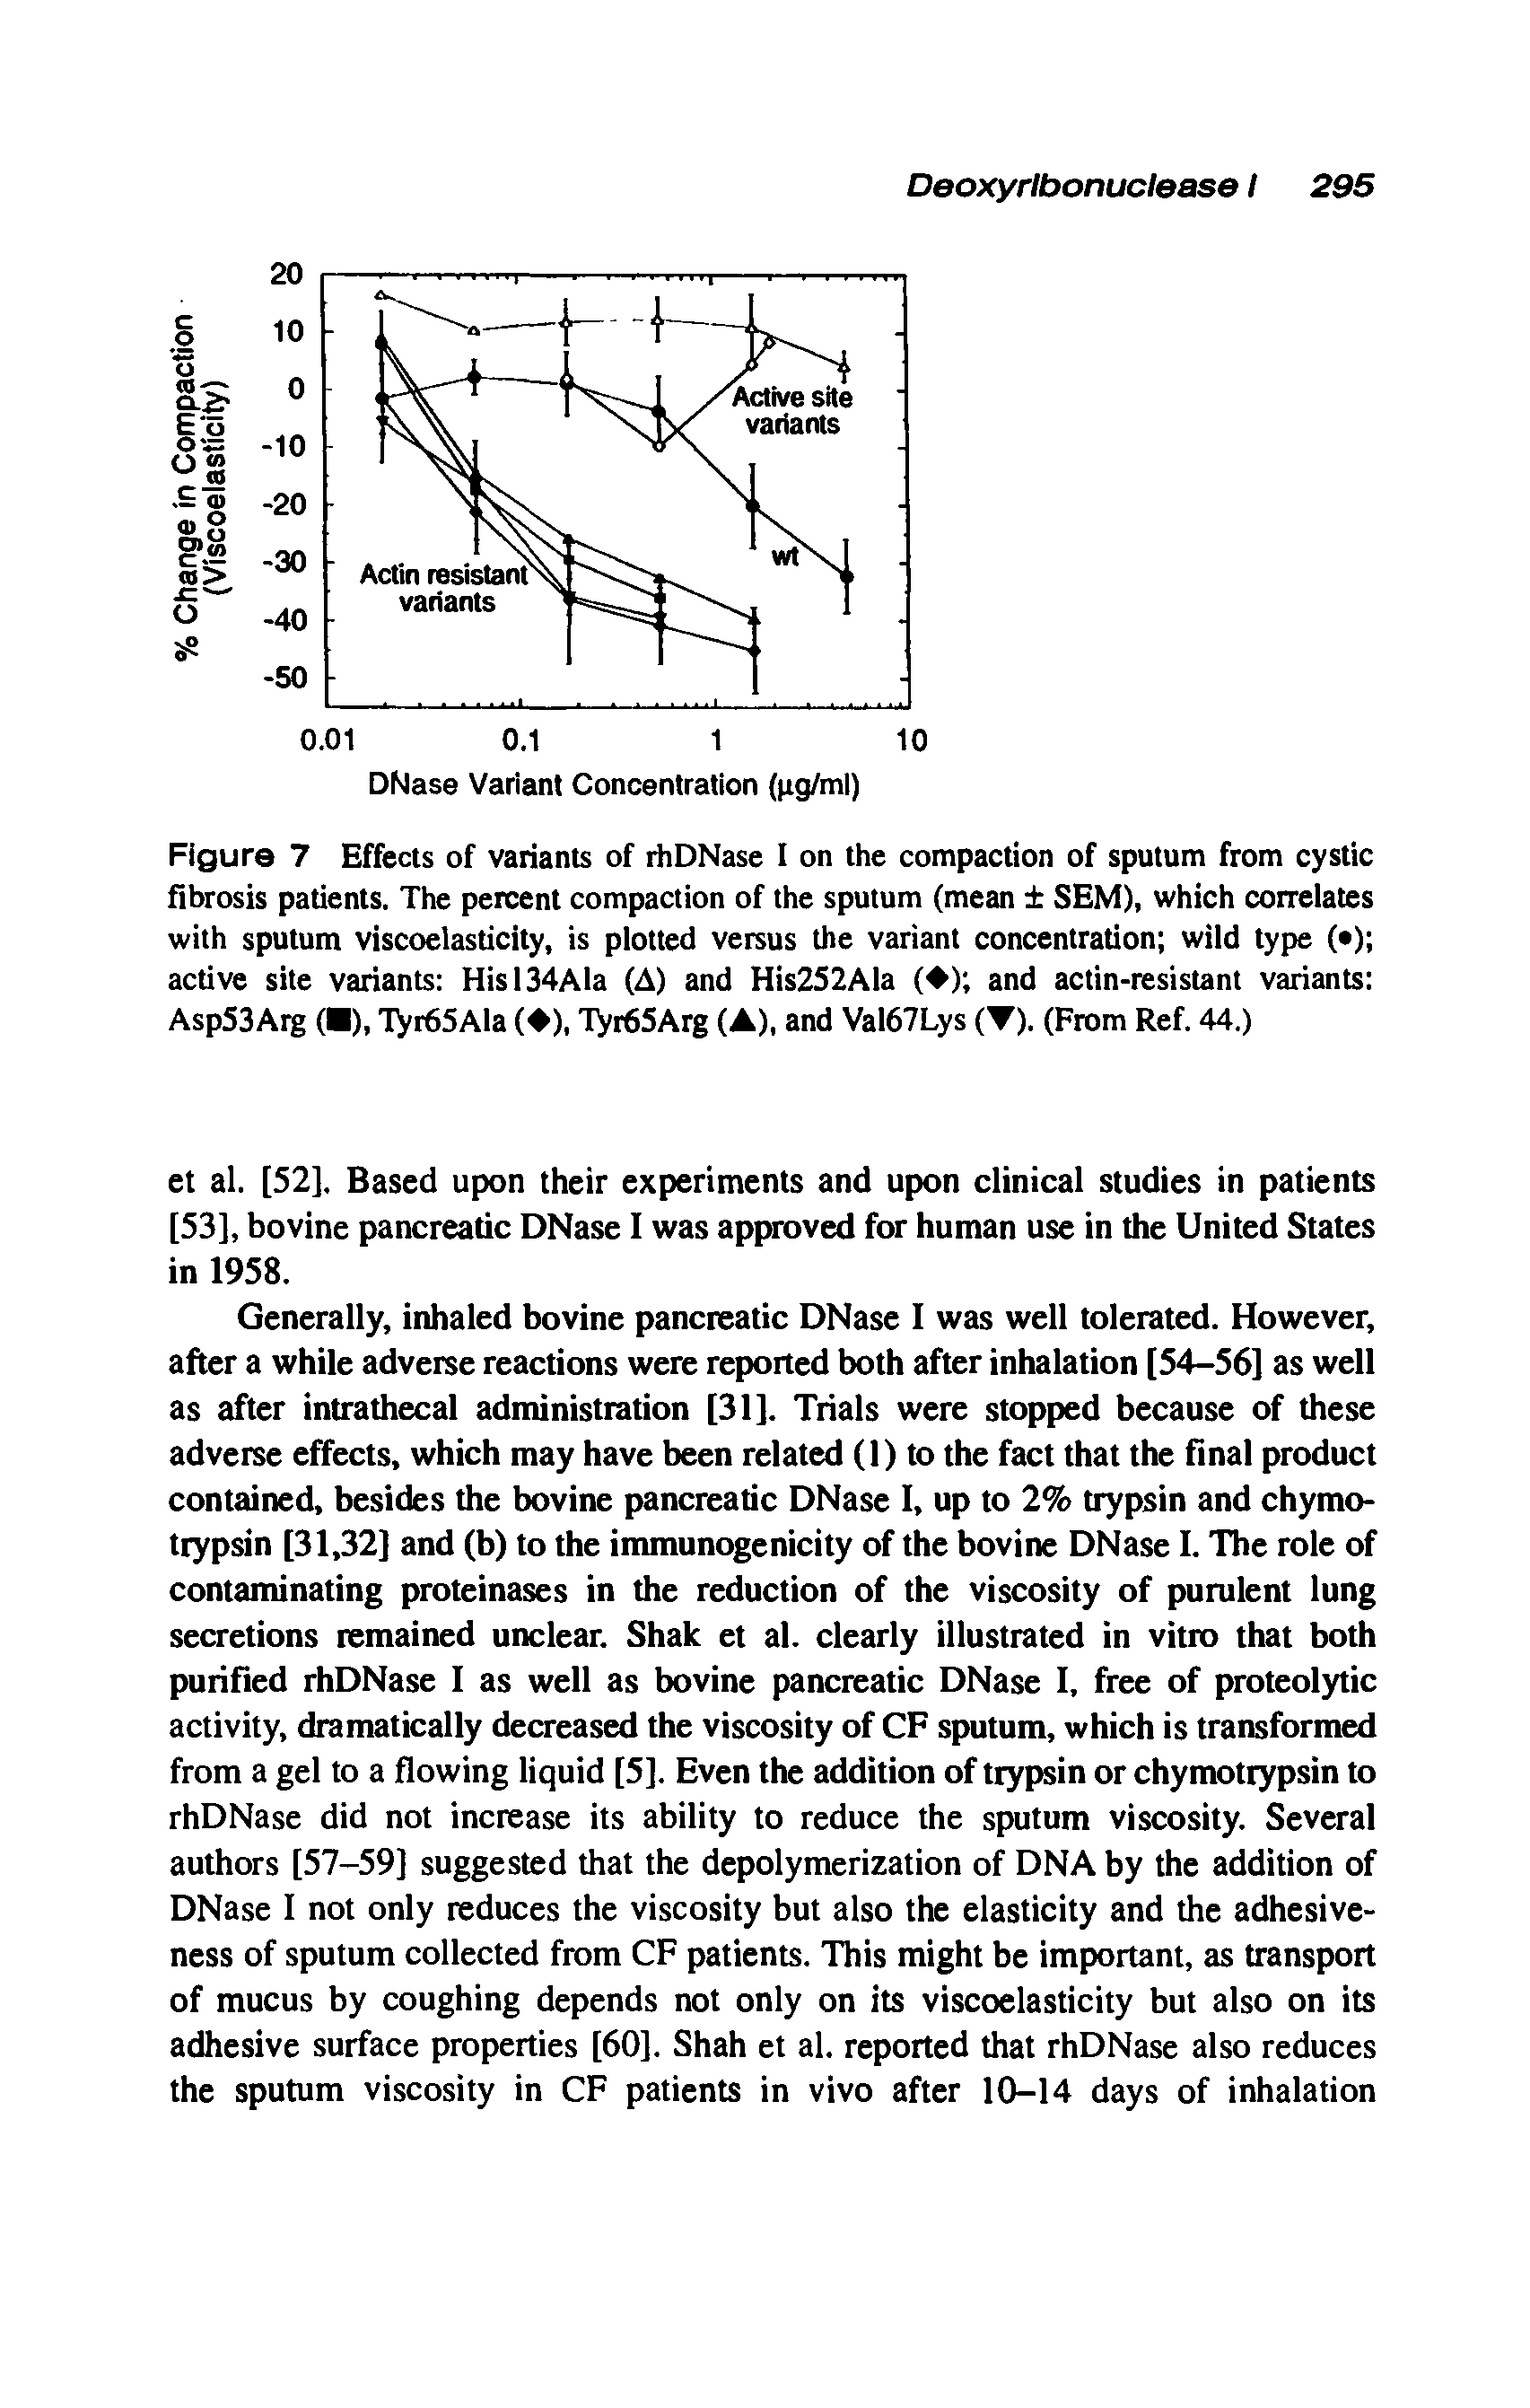 Figure 7 Effects of variants of rhDNase I on the compaction of sputum from cystic fibrosis patients. The percent compaction of the sputum (mean SEM), which correlates with sputum viscoelasticity, is plotted versus the variant concentration wild type ( ) active site variants Hisl34Ala (A) and His252Ala ( ) and actin-resistant variants Asp53Arg ( ), Tyr65Ala ( ), Tyr65Arg (A), and Val67Lys (Y). (From Ref. 44.)...